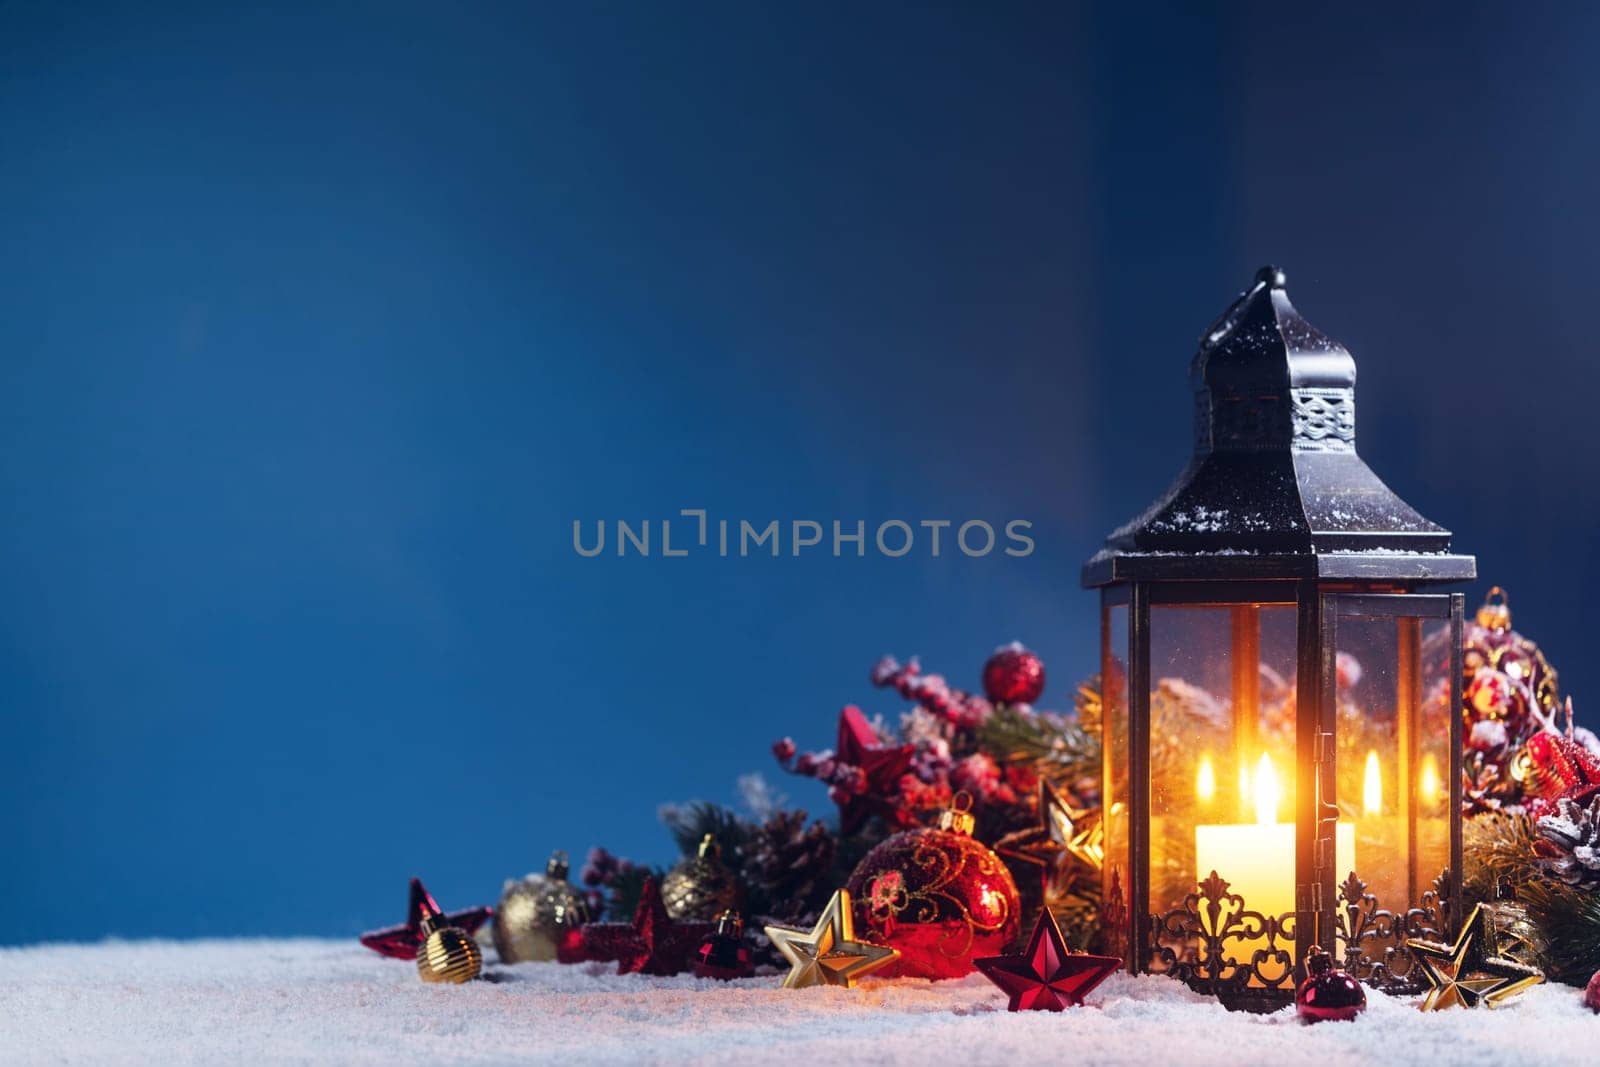 Christmas background with burning candle inside lantern and bauble decorations in snow